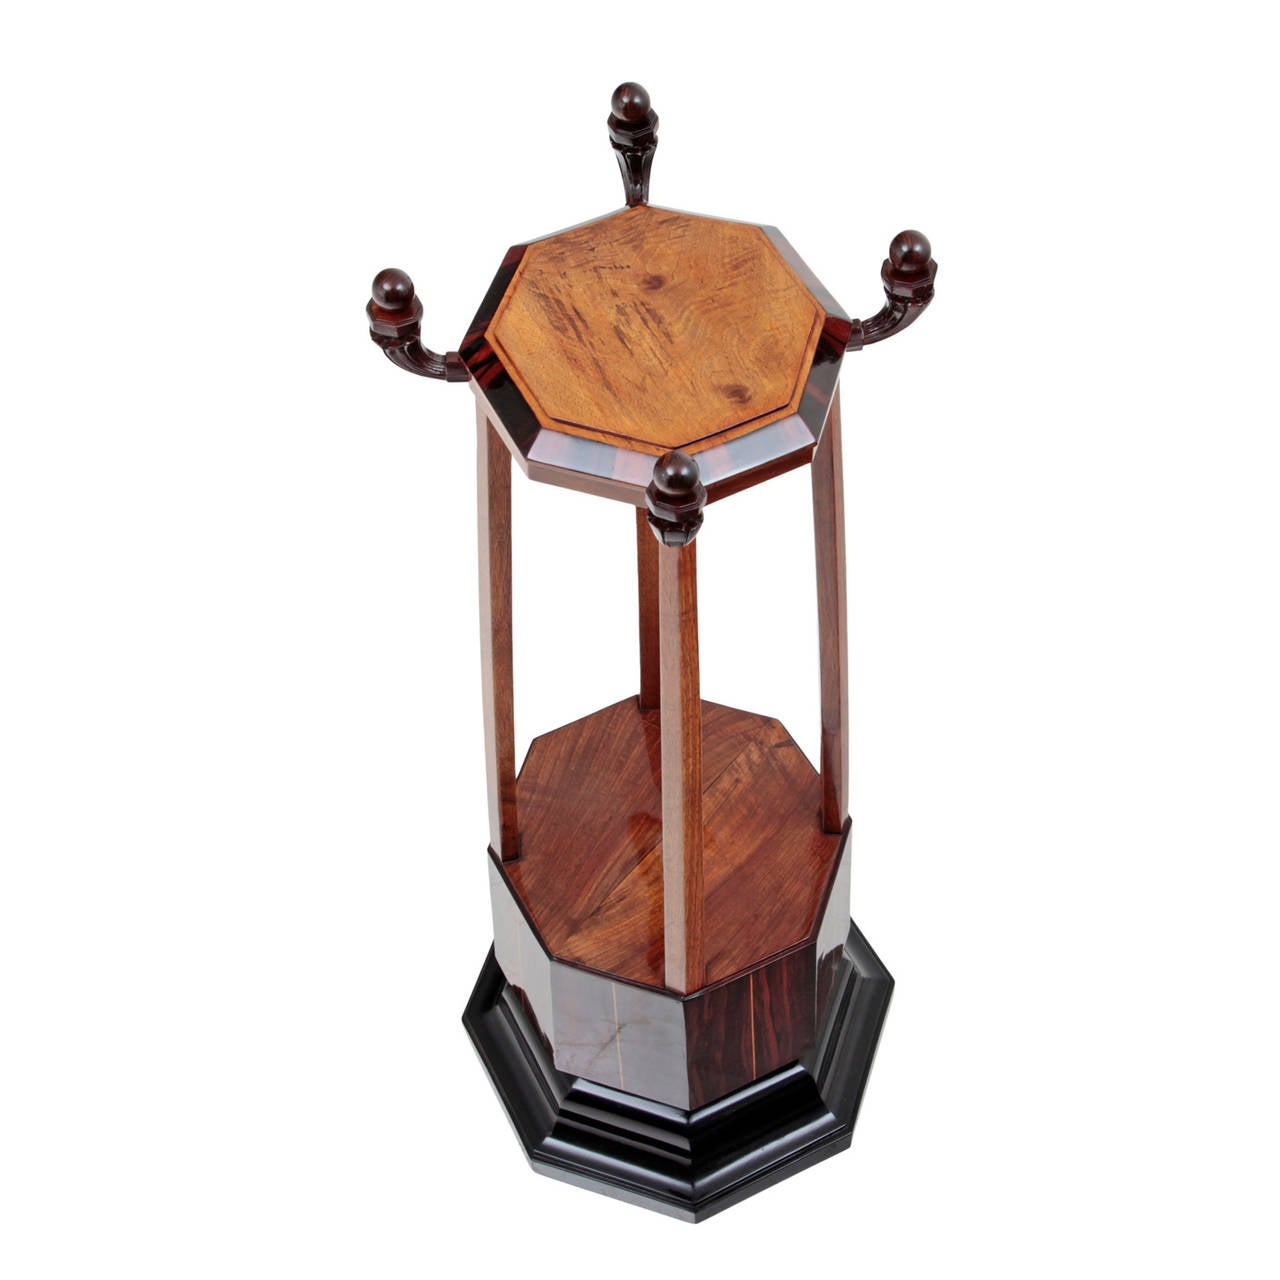 Lovely French Art Deco Pillar from the 1920s.
The octagonal Art Deco column is made out of rosewood and stands on a profiled, ebonized foot with a short and likewise octagonal shaft and a drum-shaped middle part. Over it are four long pentagonal